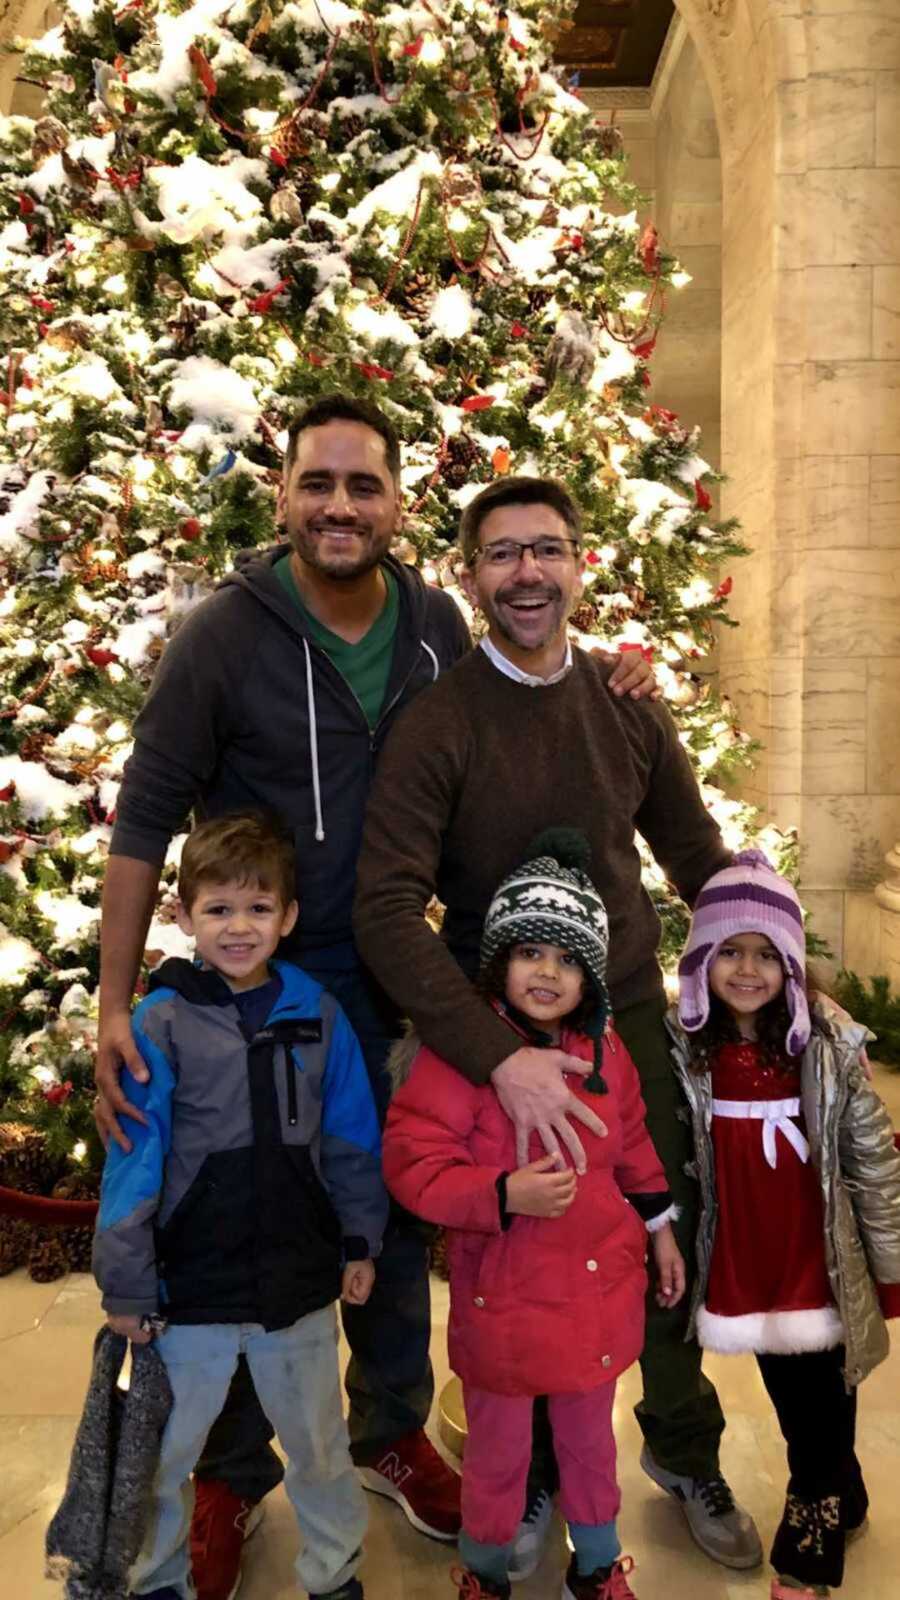 Gay couple with their children during Christmas time in front of a decorated tree